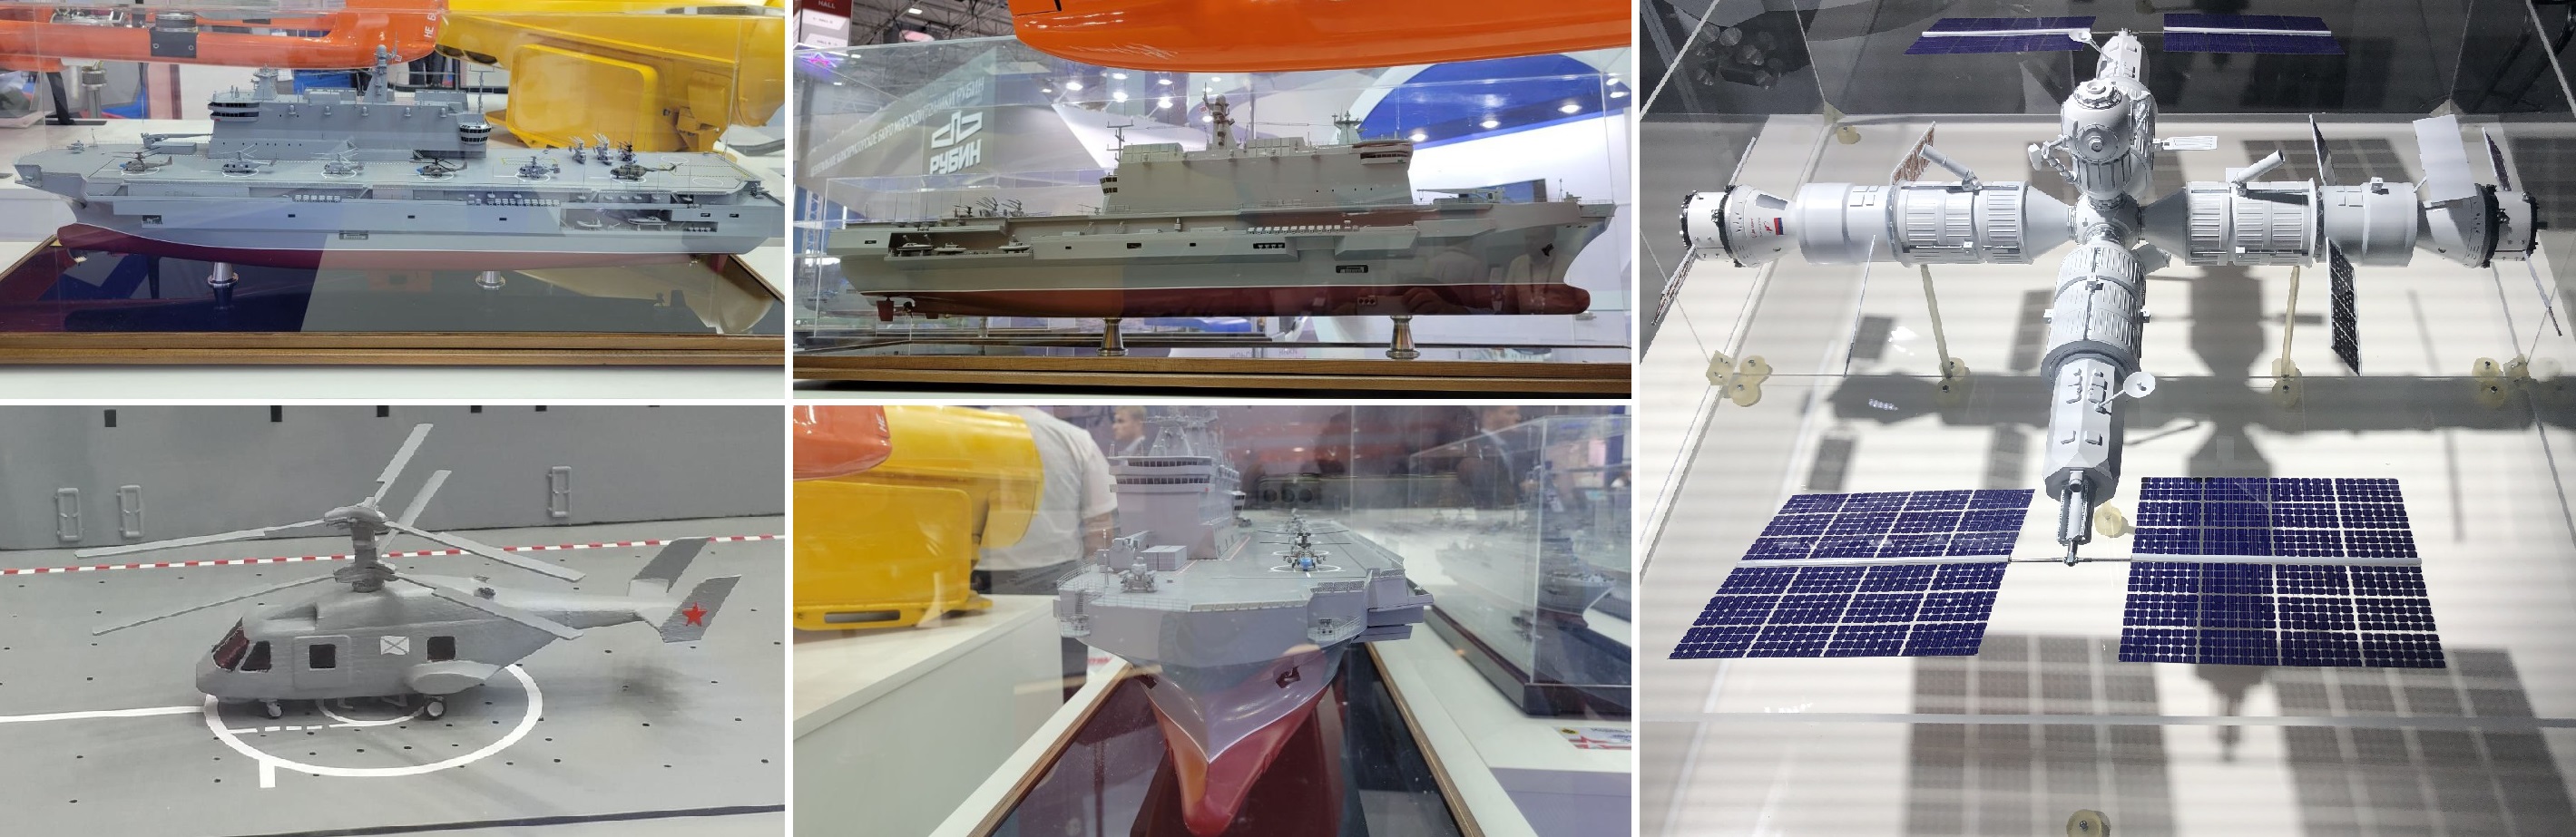 Attack of dummies: russia unveiled an orbital station, a landing craft, a combined drone with a speed of up to 140 km/h, and the Ka-65 helicopter